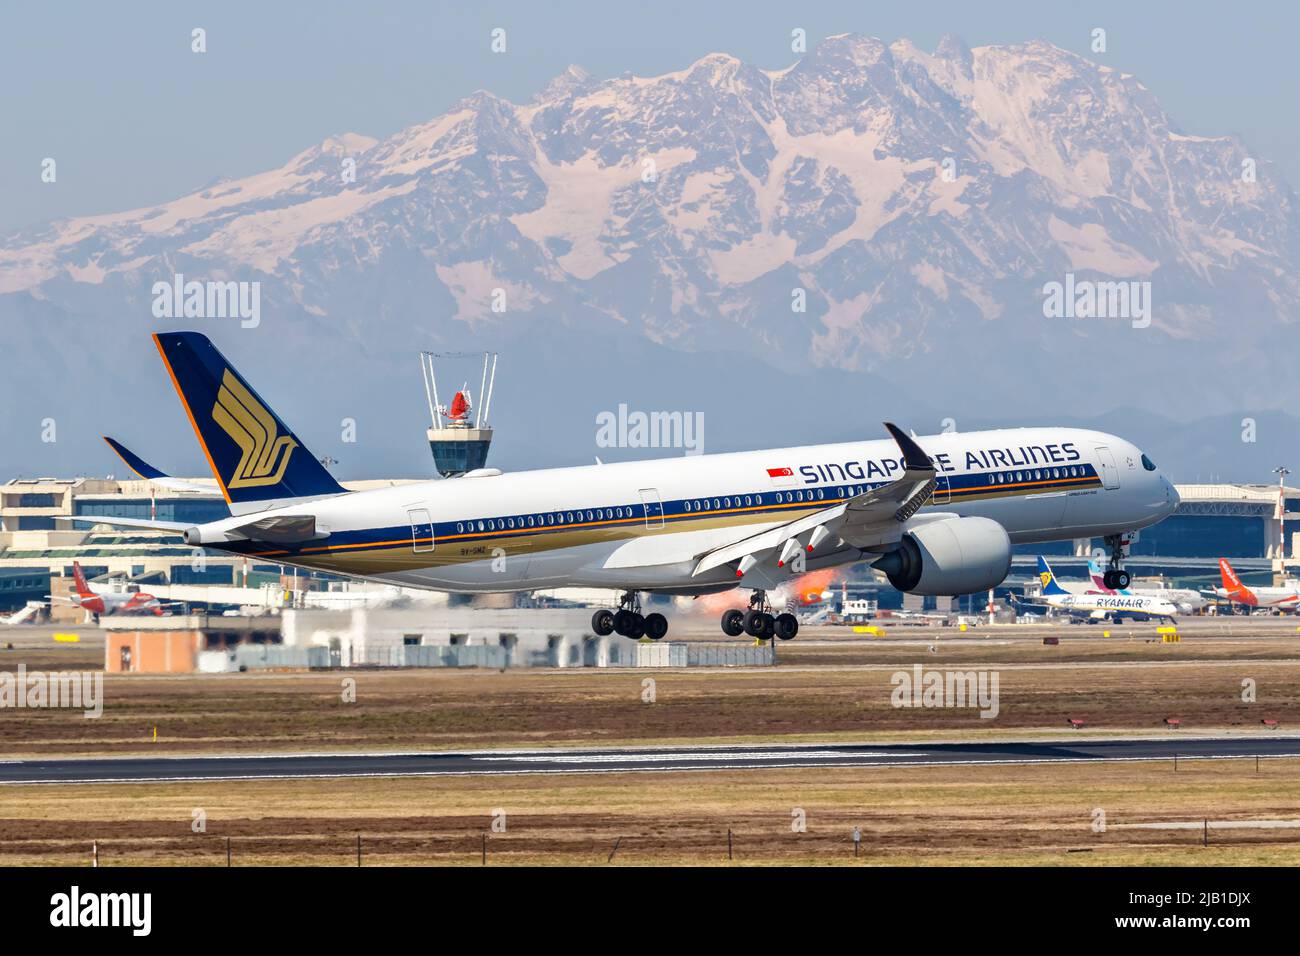 Milan, Italy - March 24, 2022: Singapore Airlines Airbus A350-900 airplane at Milan Malpensa airport (MXP) in Italy. Stock Photo